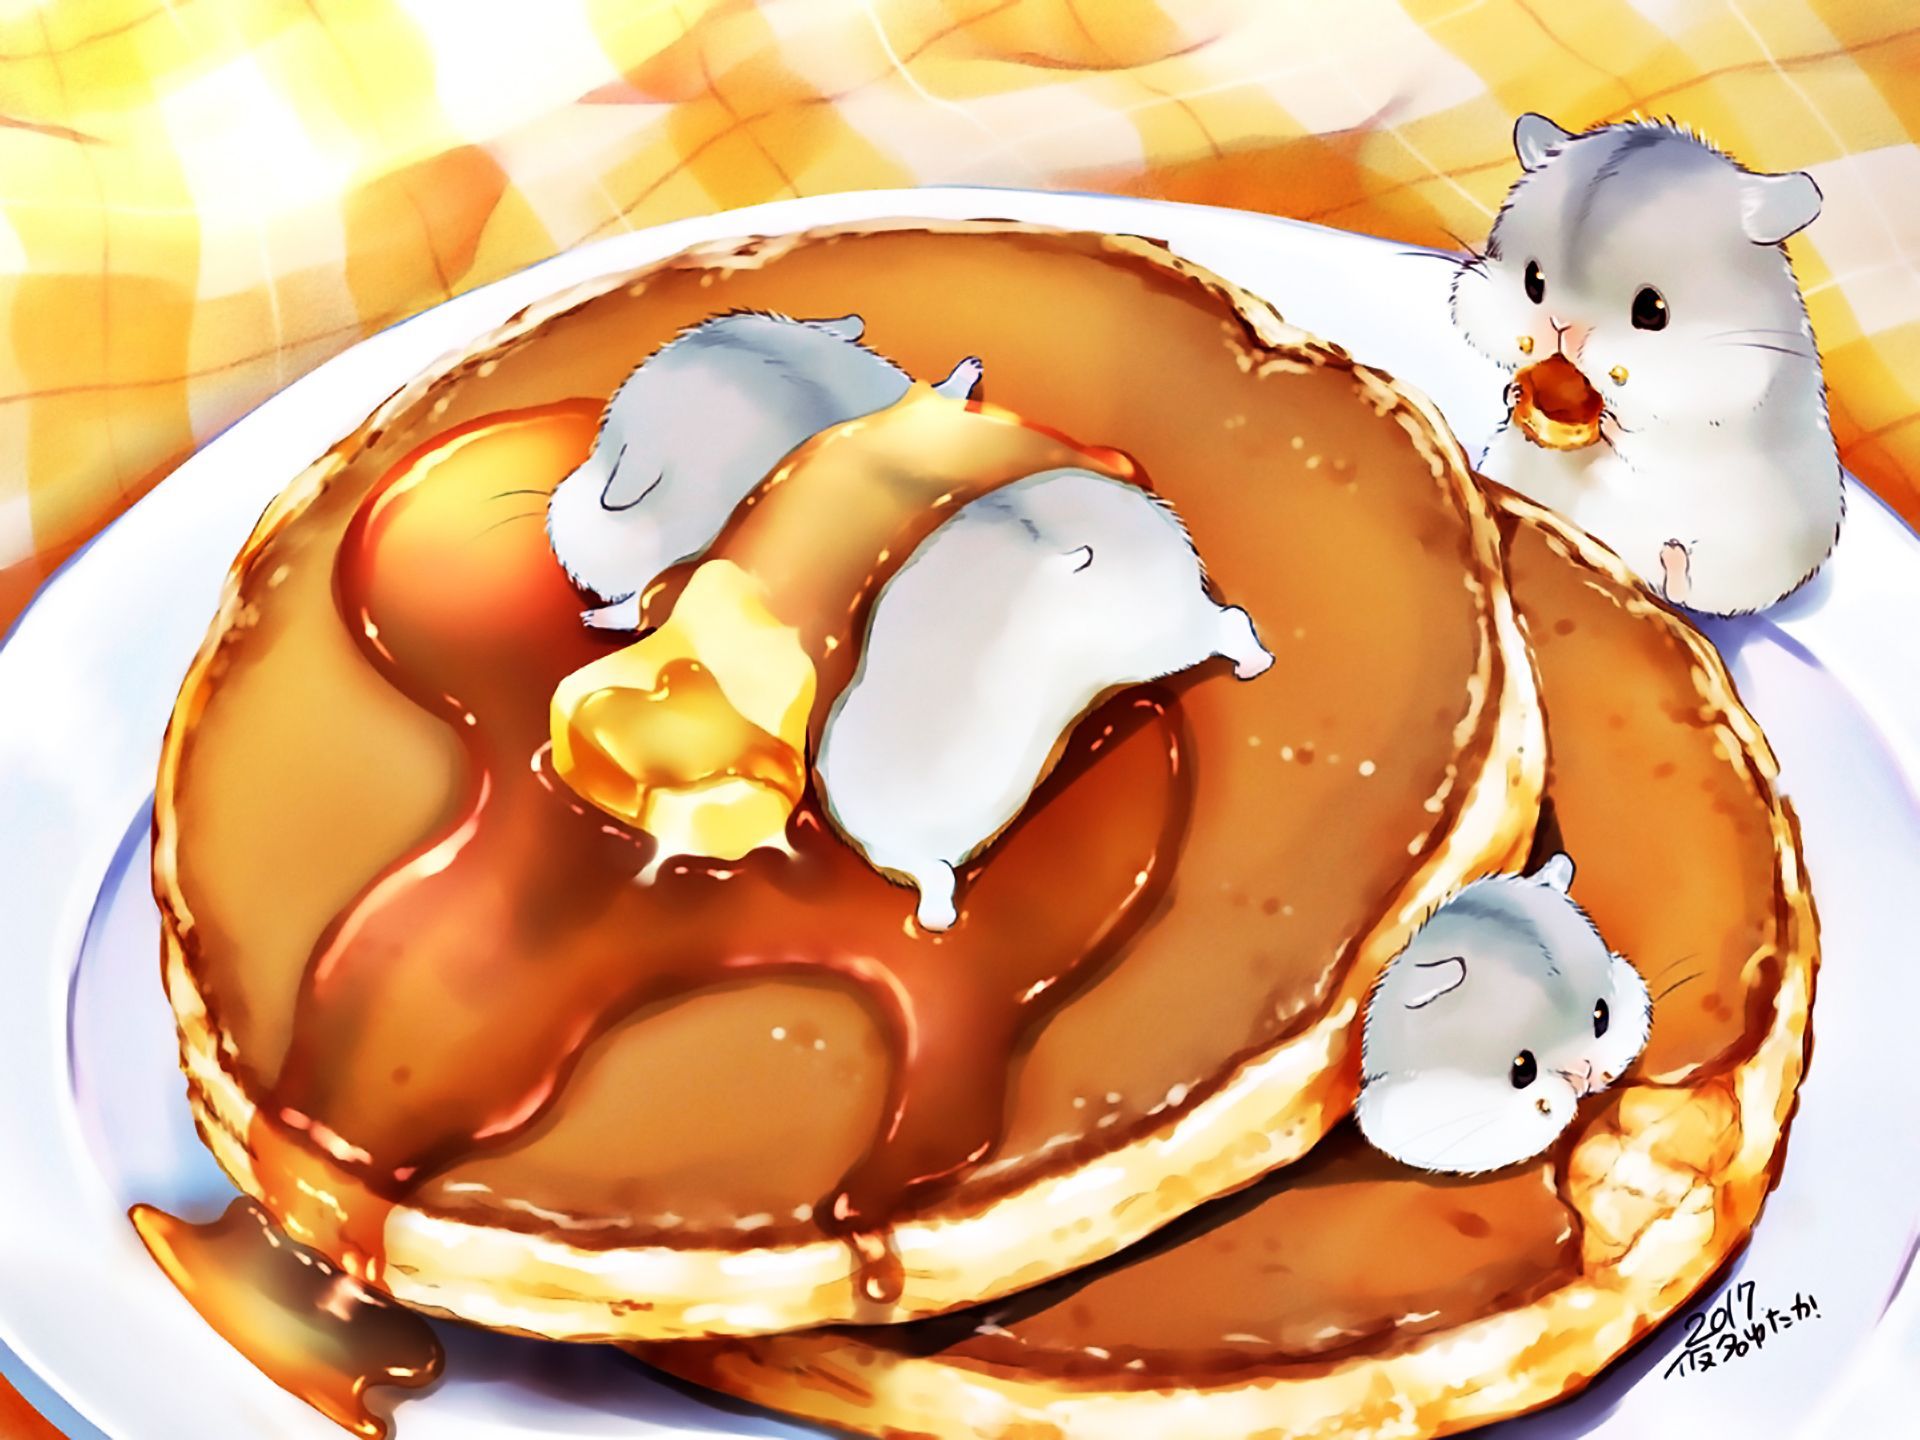 Pancakes with hamsters and syrup - Food